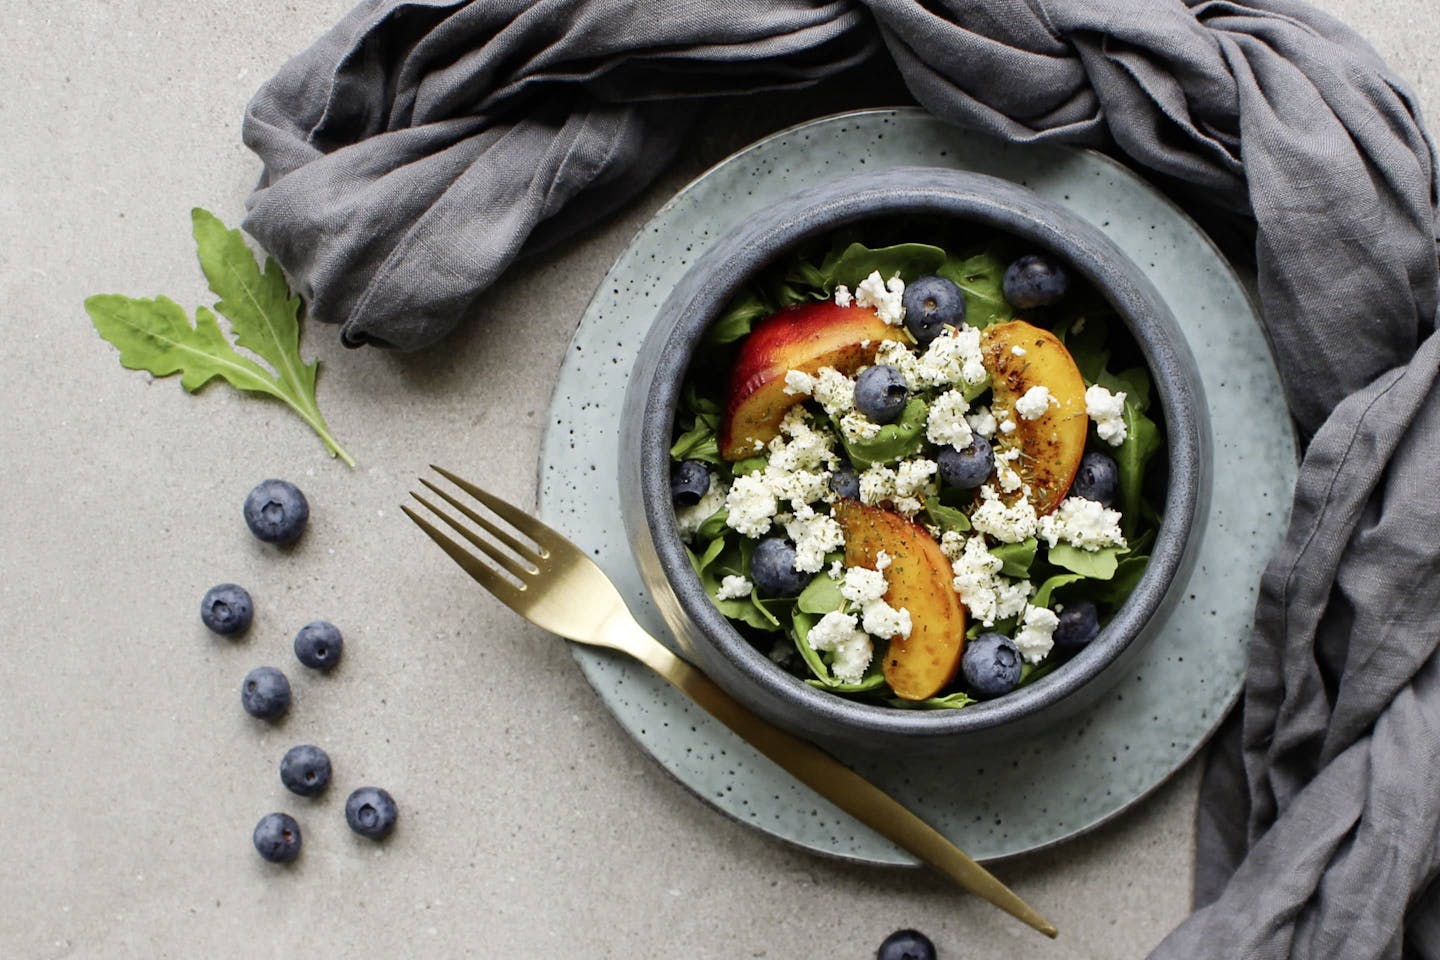 Salad with crumbled goat cheese, fresh blueberries and peach in a light blue bowl